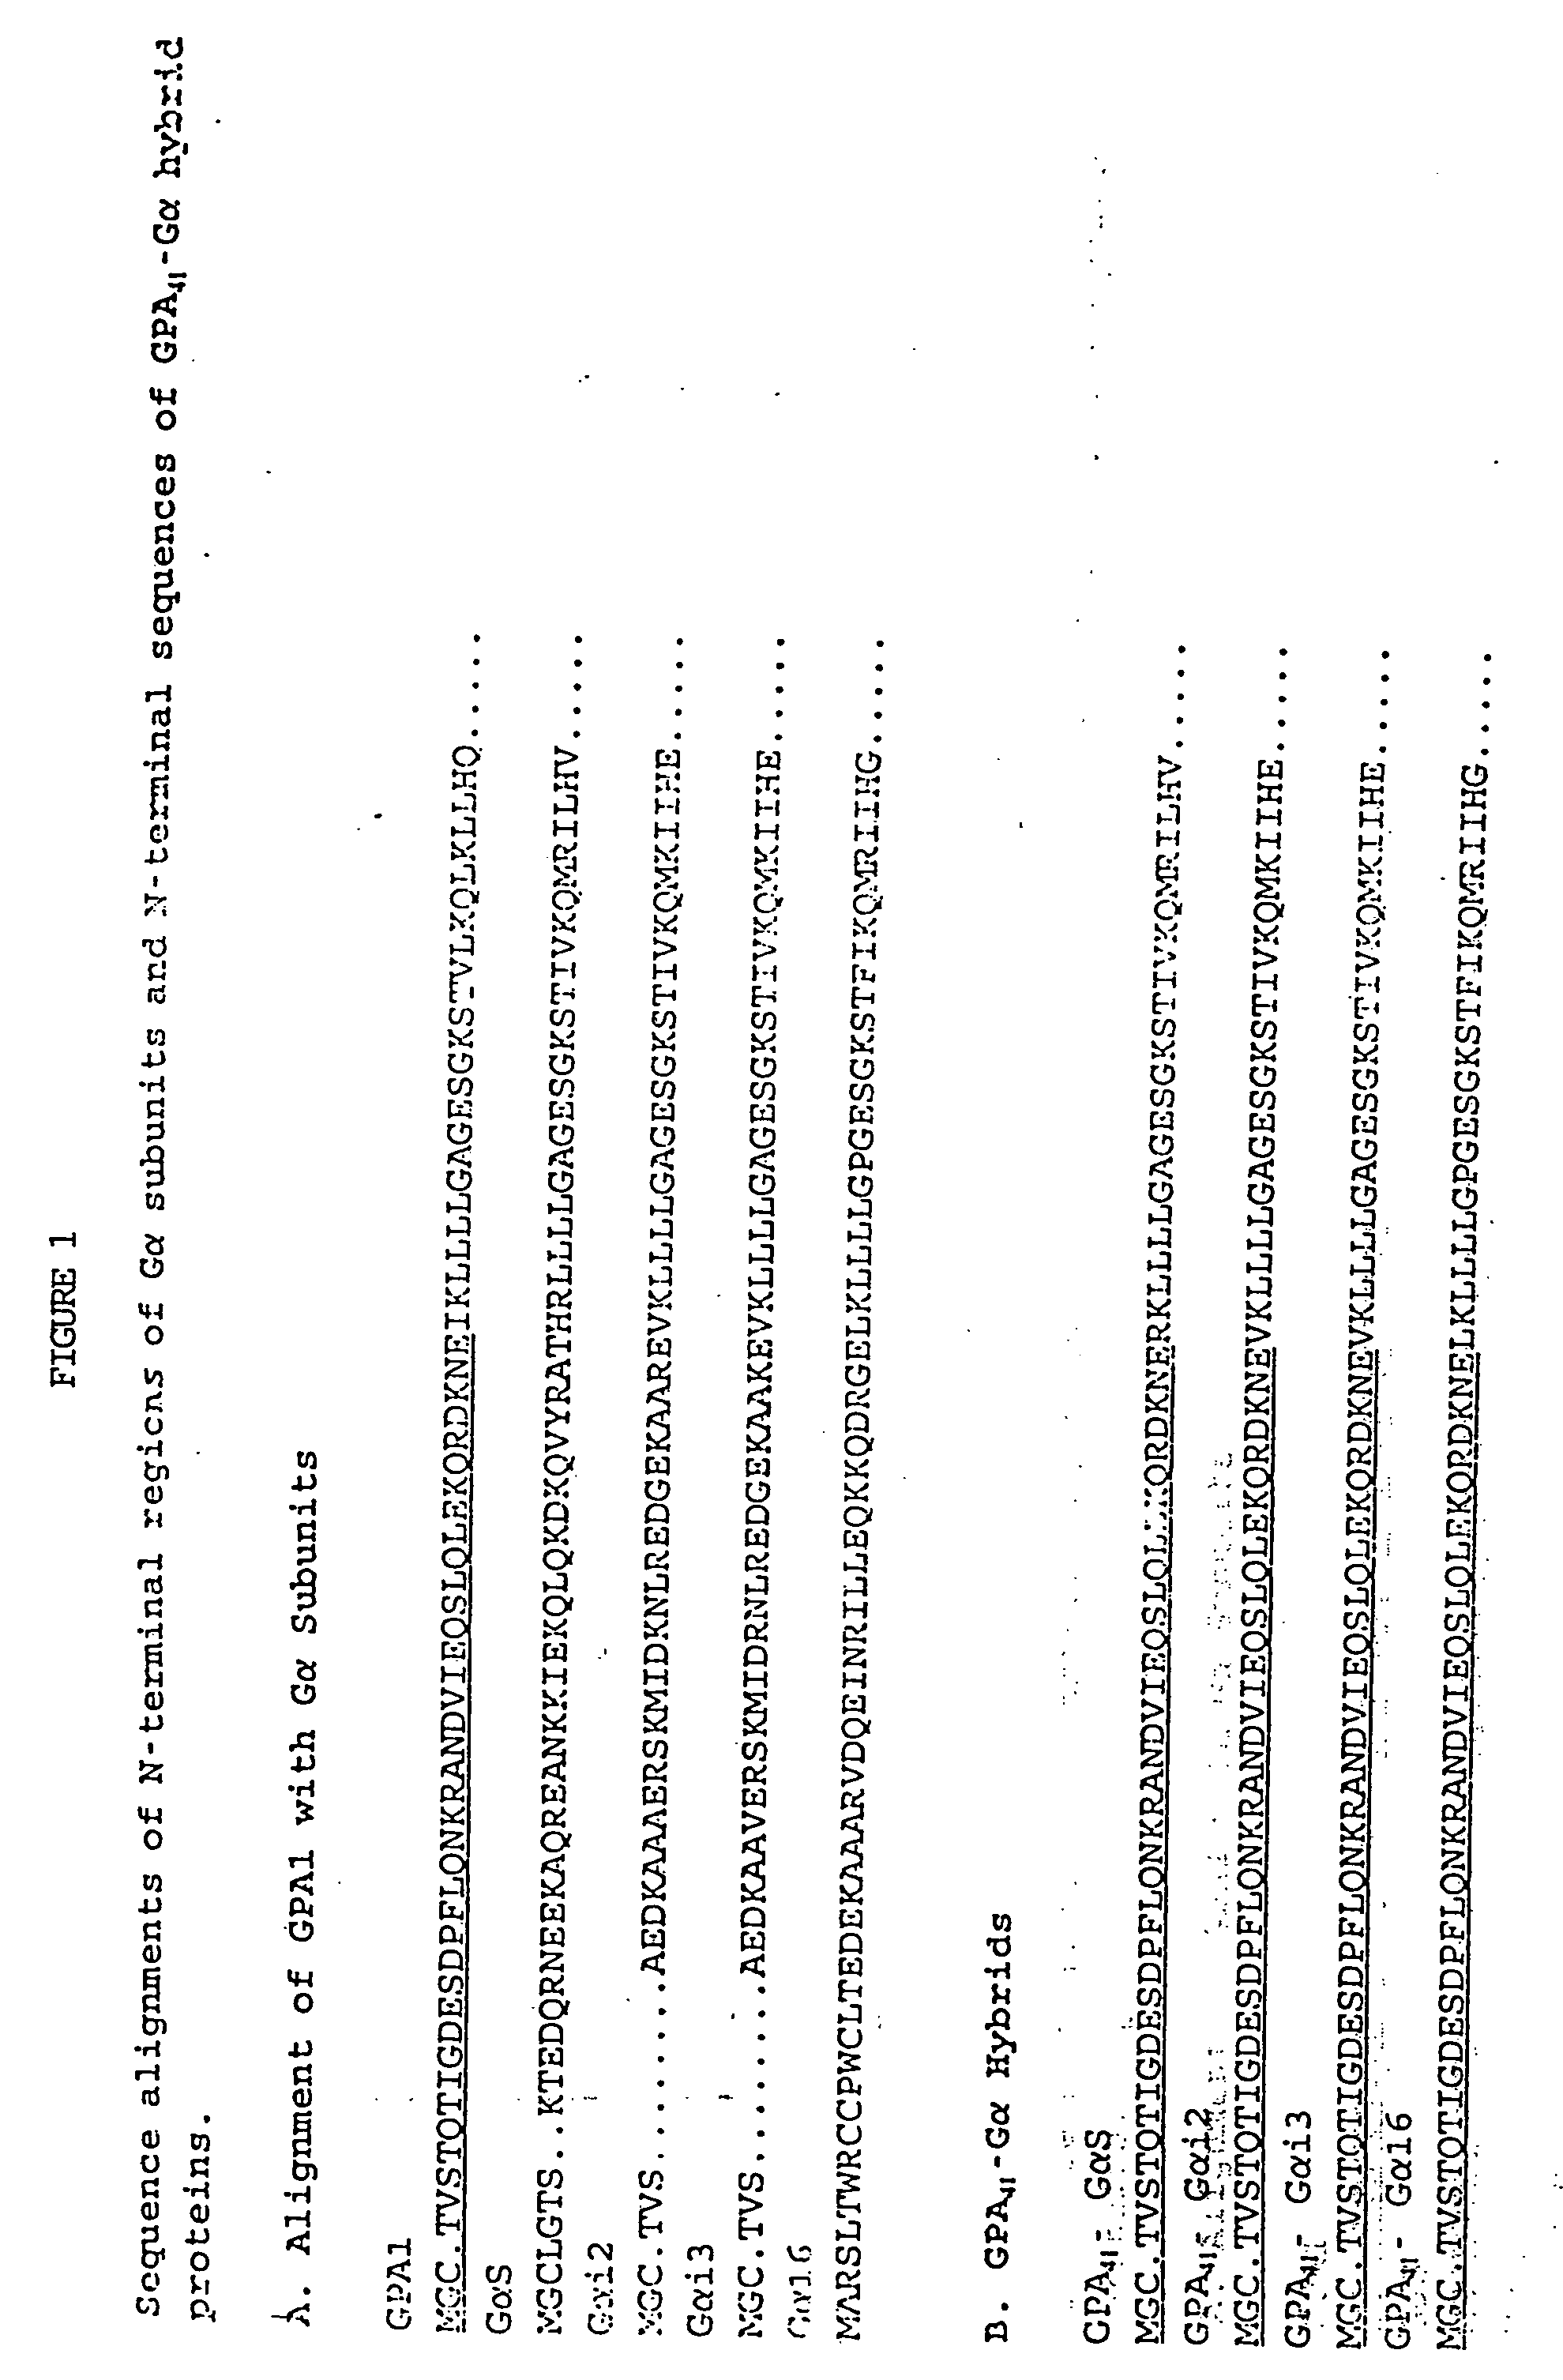 Yeast cells expressing modified G proteins and methods of use therefor